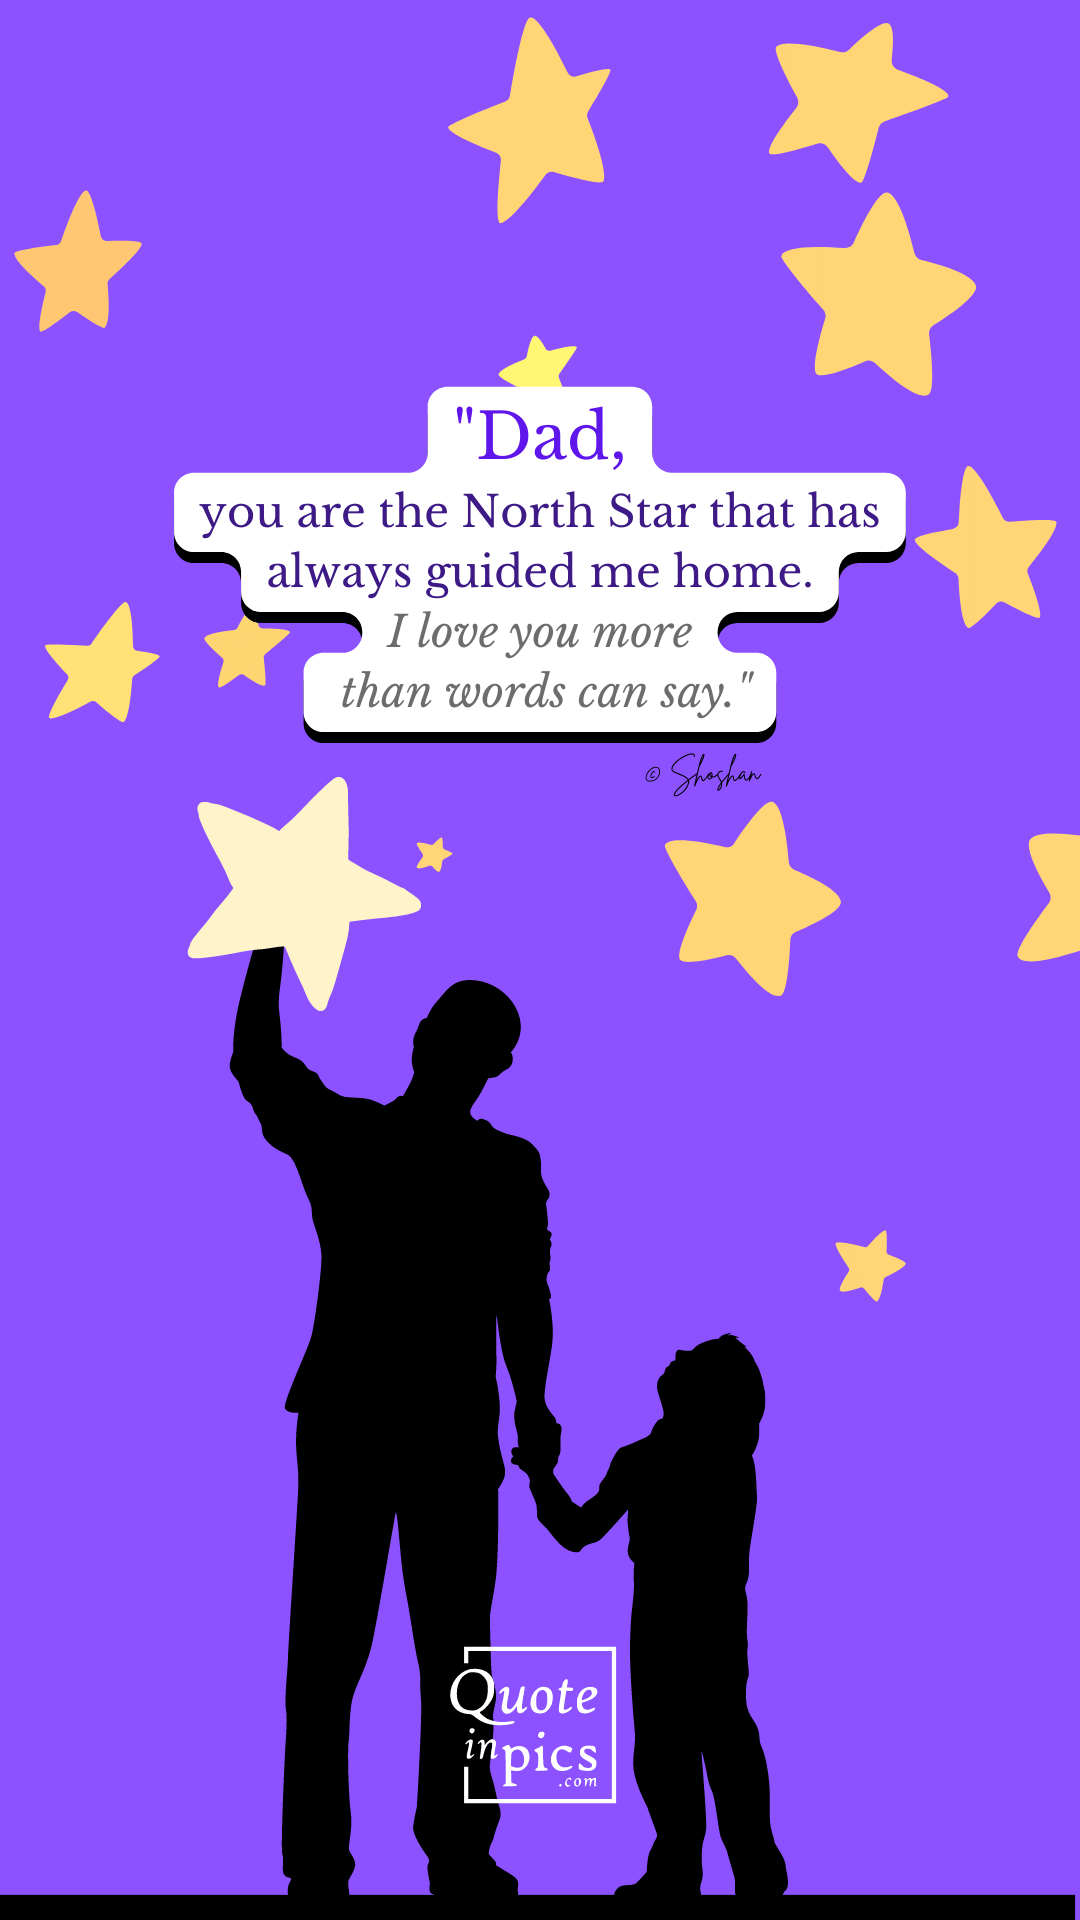 Dad, you are the North Star that has always guided me